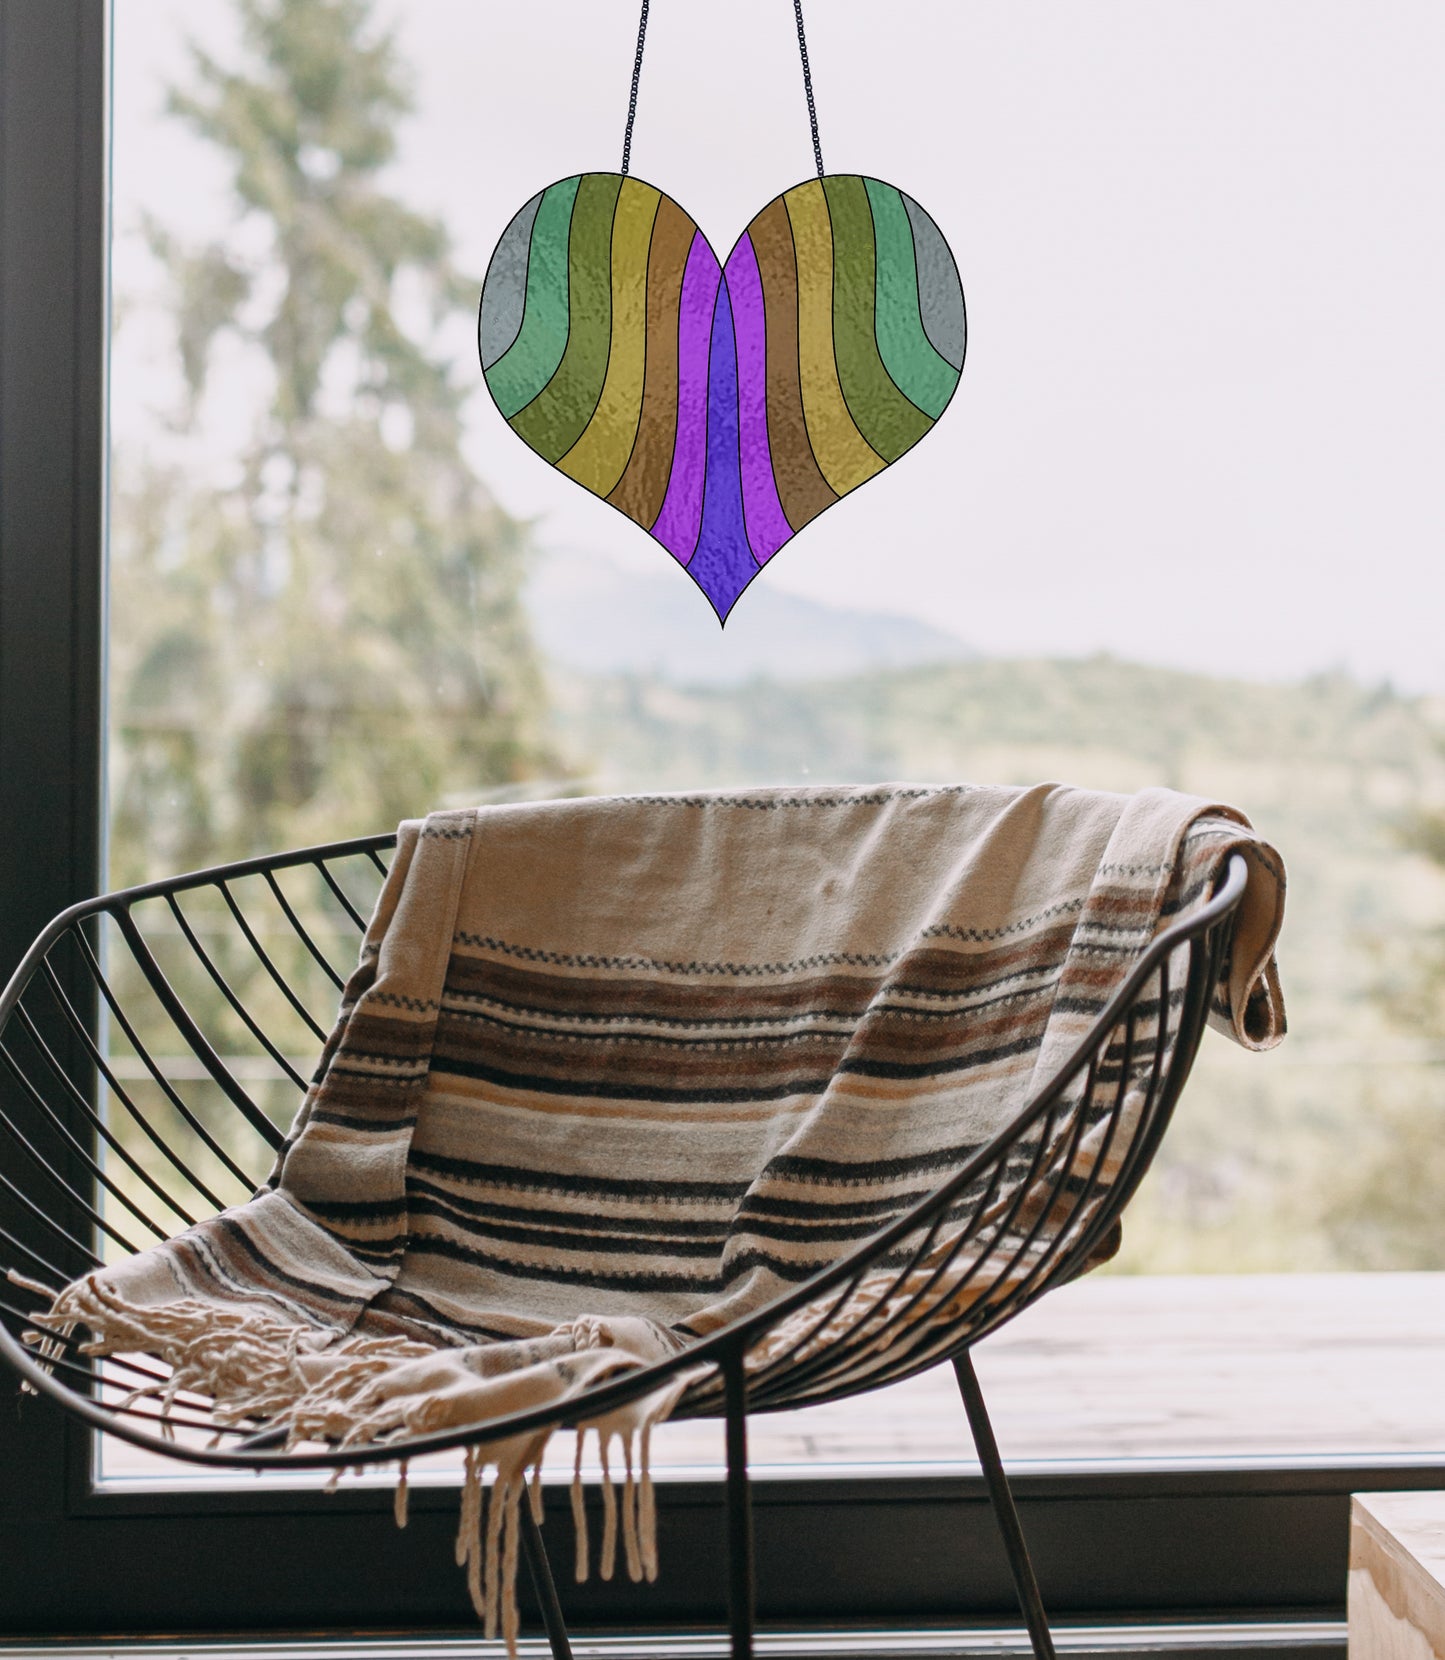 Retro Boho Heart Stained Glass Pattern